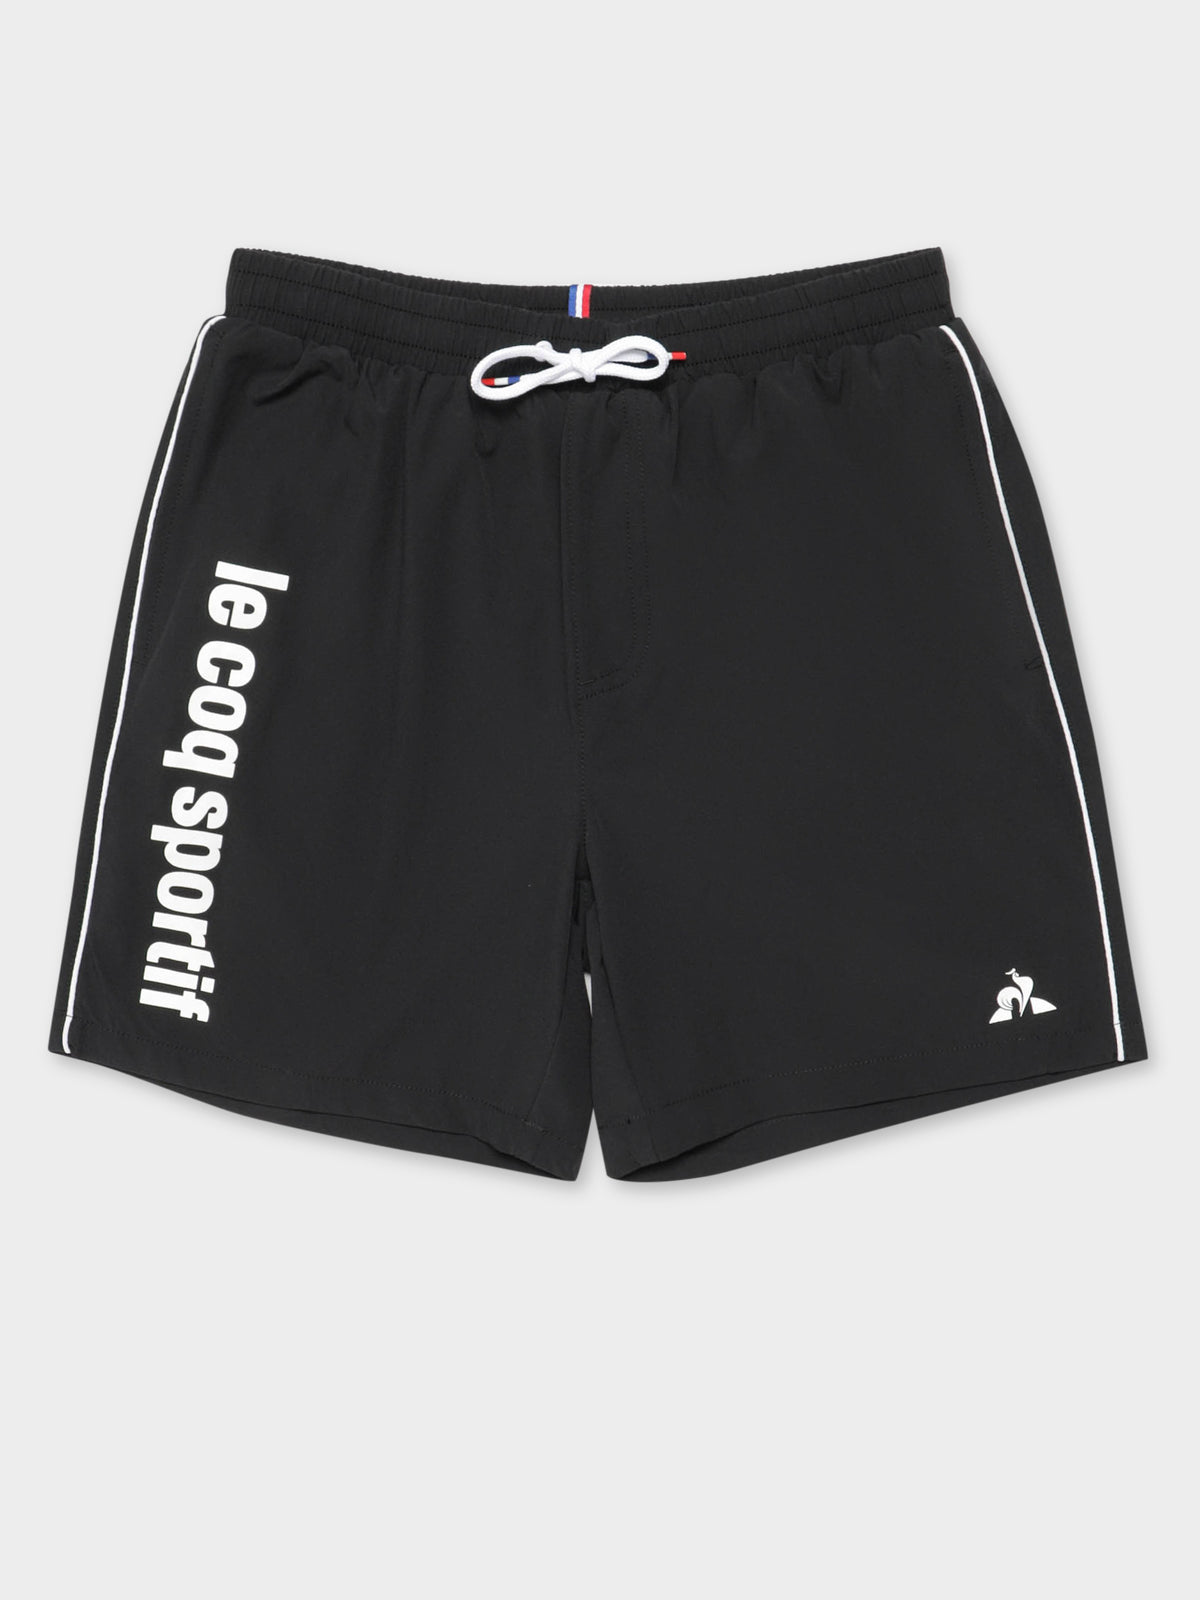 Concurrent Shorts in Black